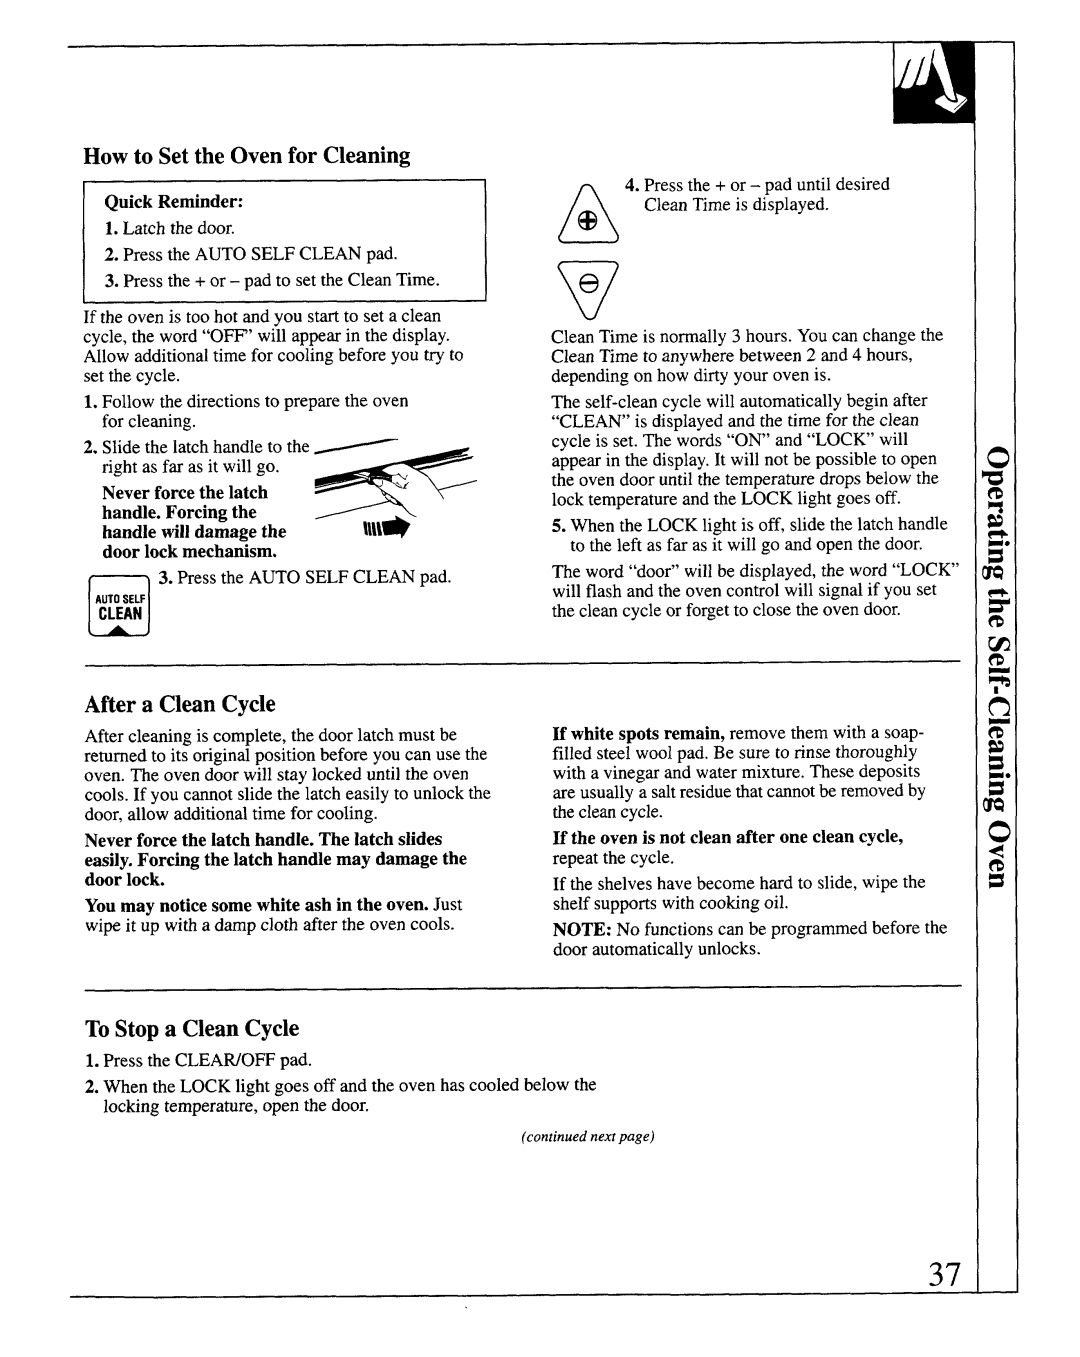 GE JSP69 warranty How to Set the Oven for Cleaning, After a Clean Cycle, To Stop a Clean Cycle 